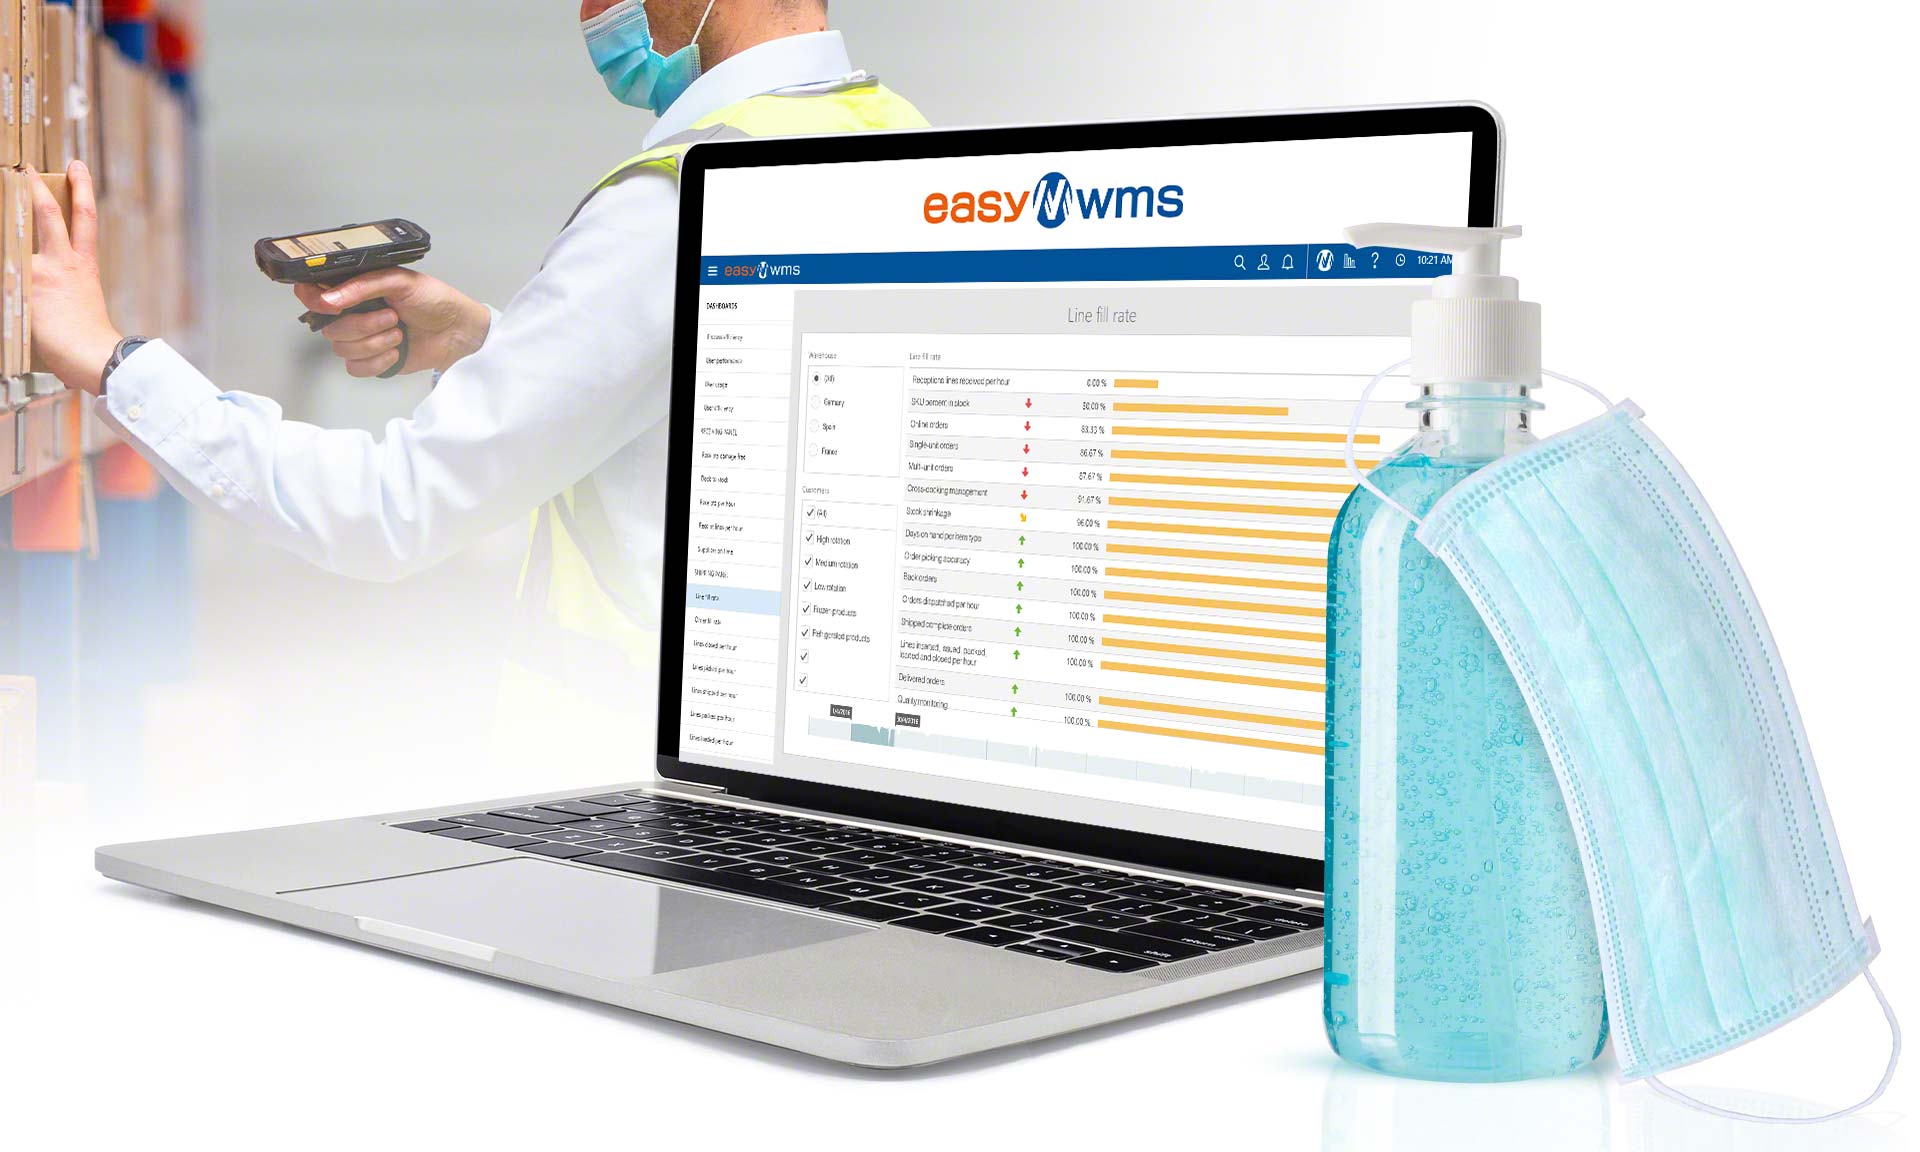 Easy WMS will control the traceability of a wide variety of Tecnol's items